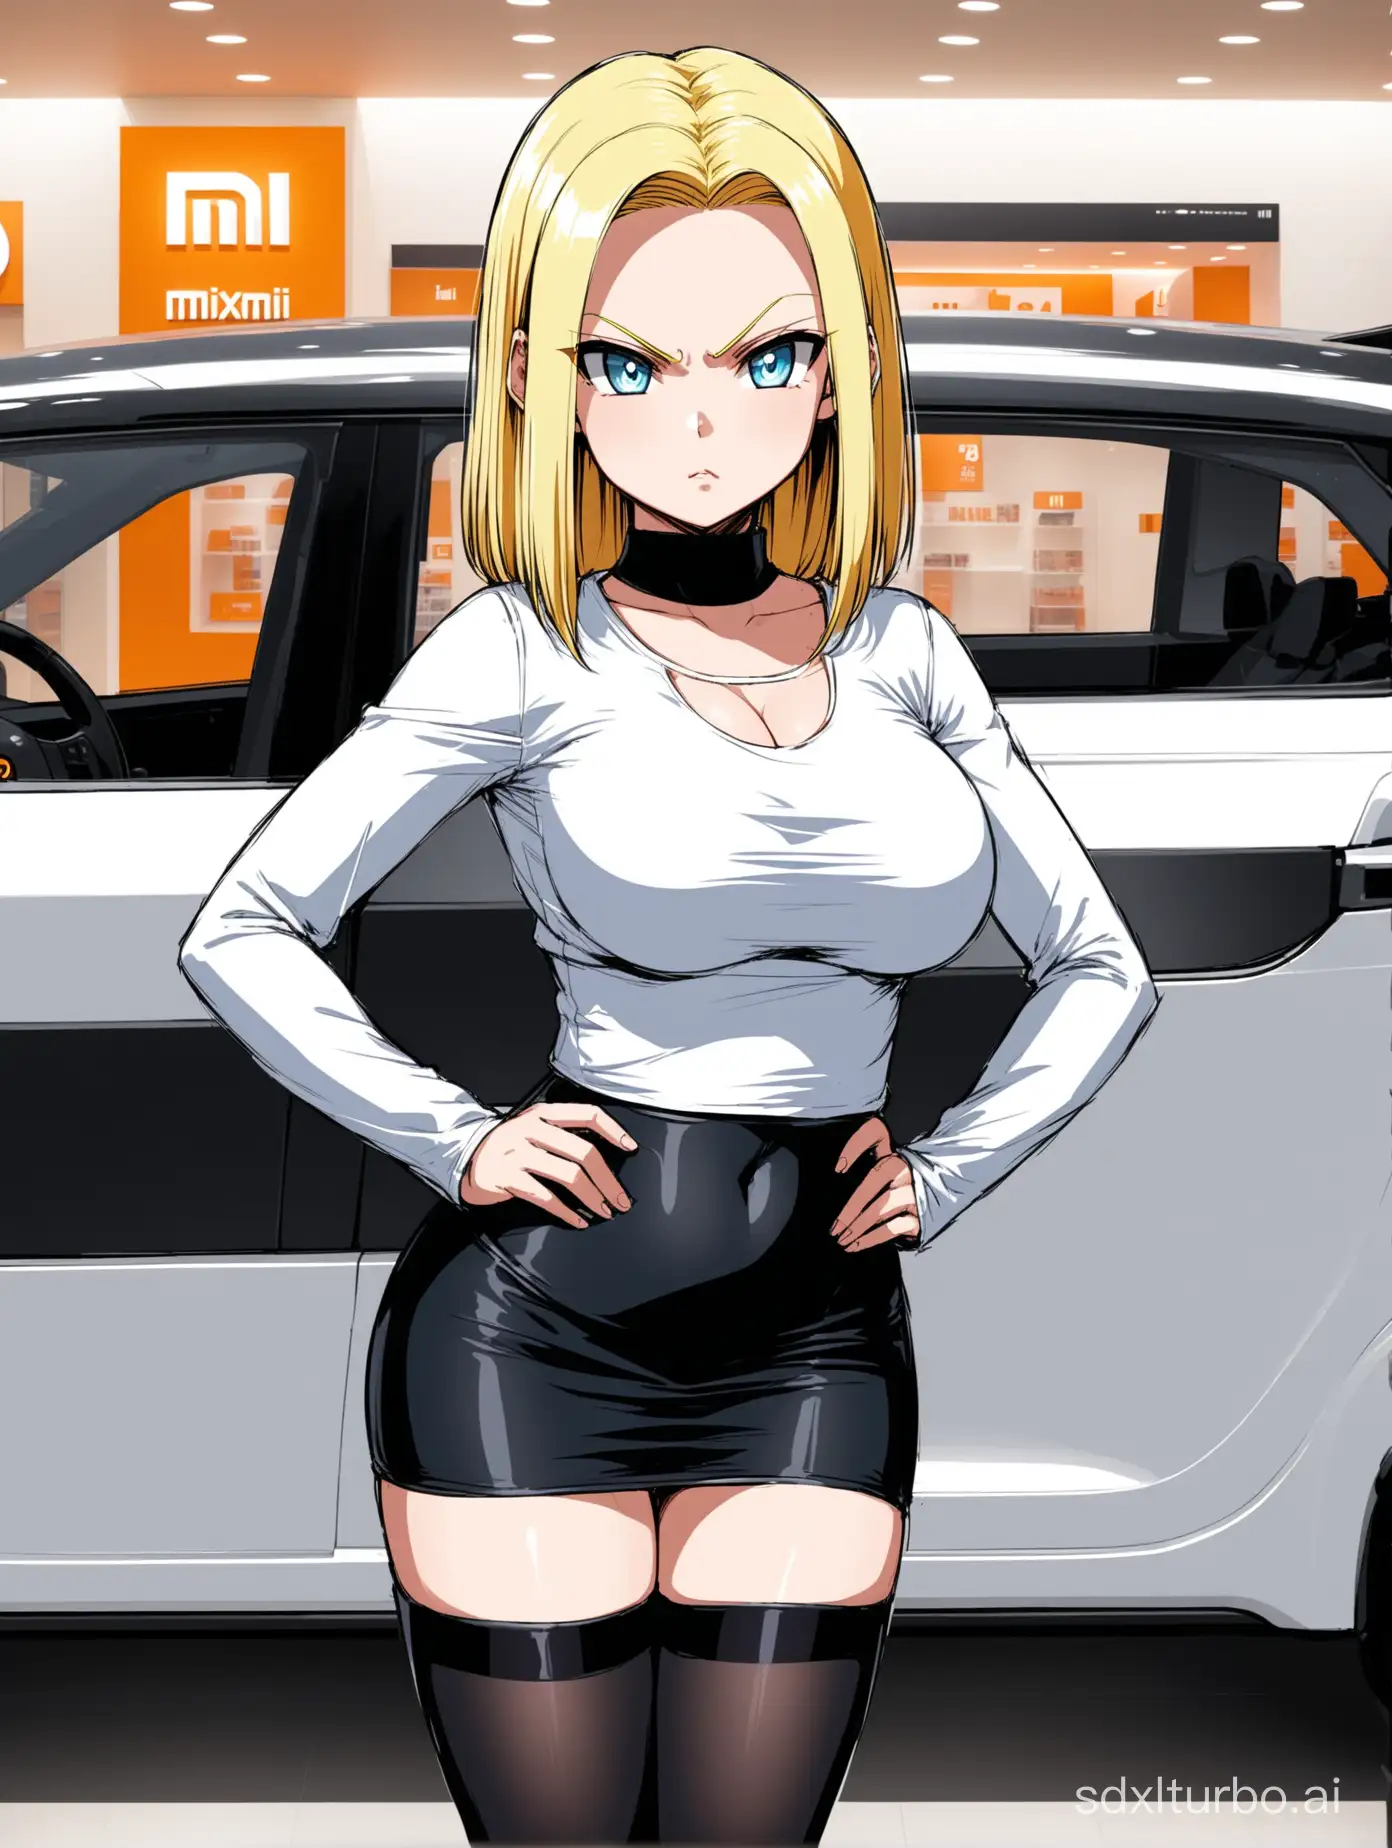 Dragon Ball character, the sexy and voluptuous Android 18, wearing a white top and skirt, black stockings, with a cold and haughty expression, standing inside a Xiaomi 4S store looking at a Xiaomi SU7 car.